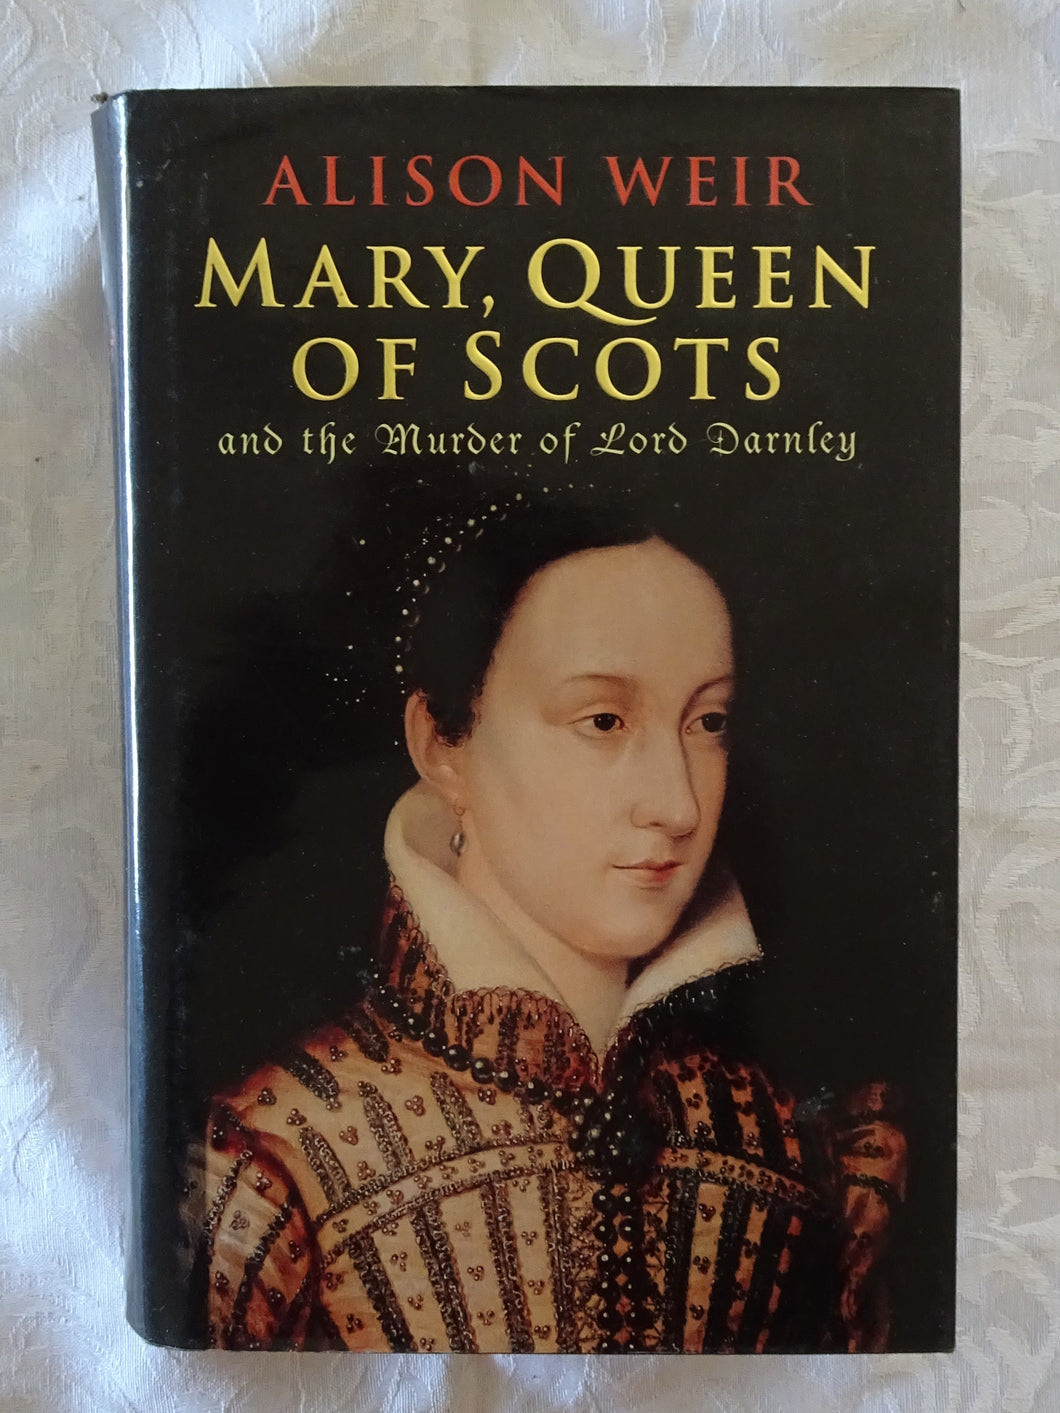 Mary, Queen of Scots by Alison Weir